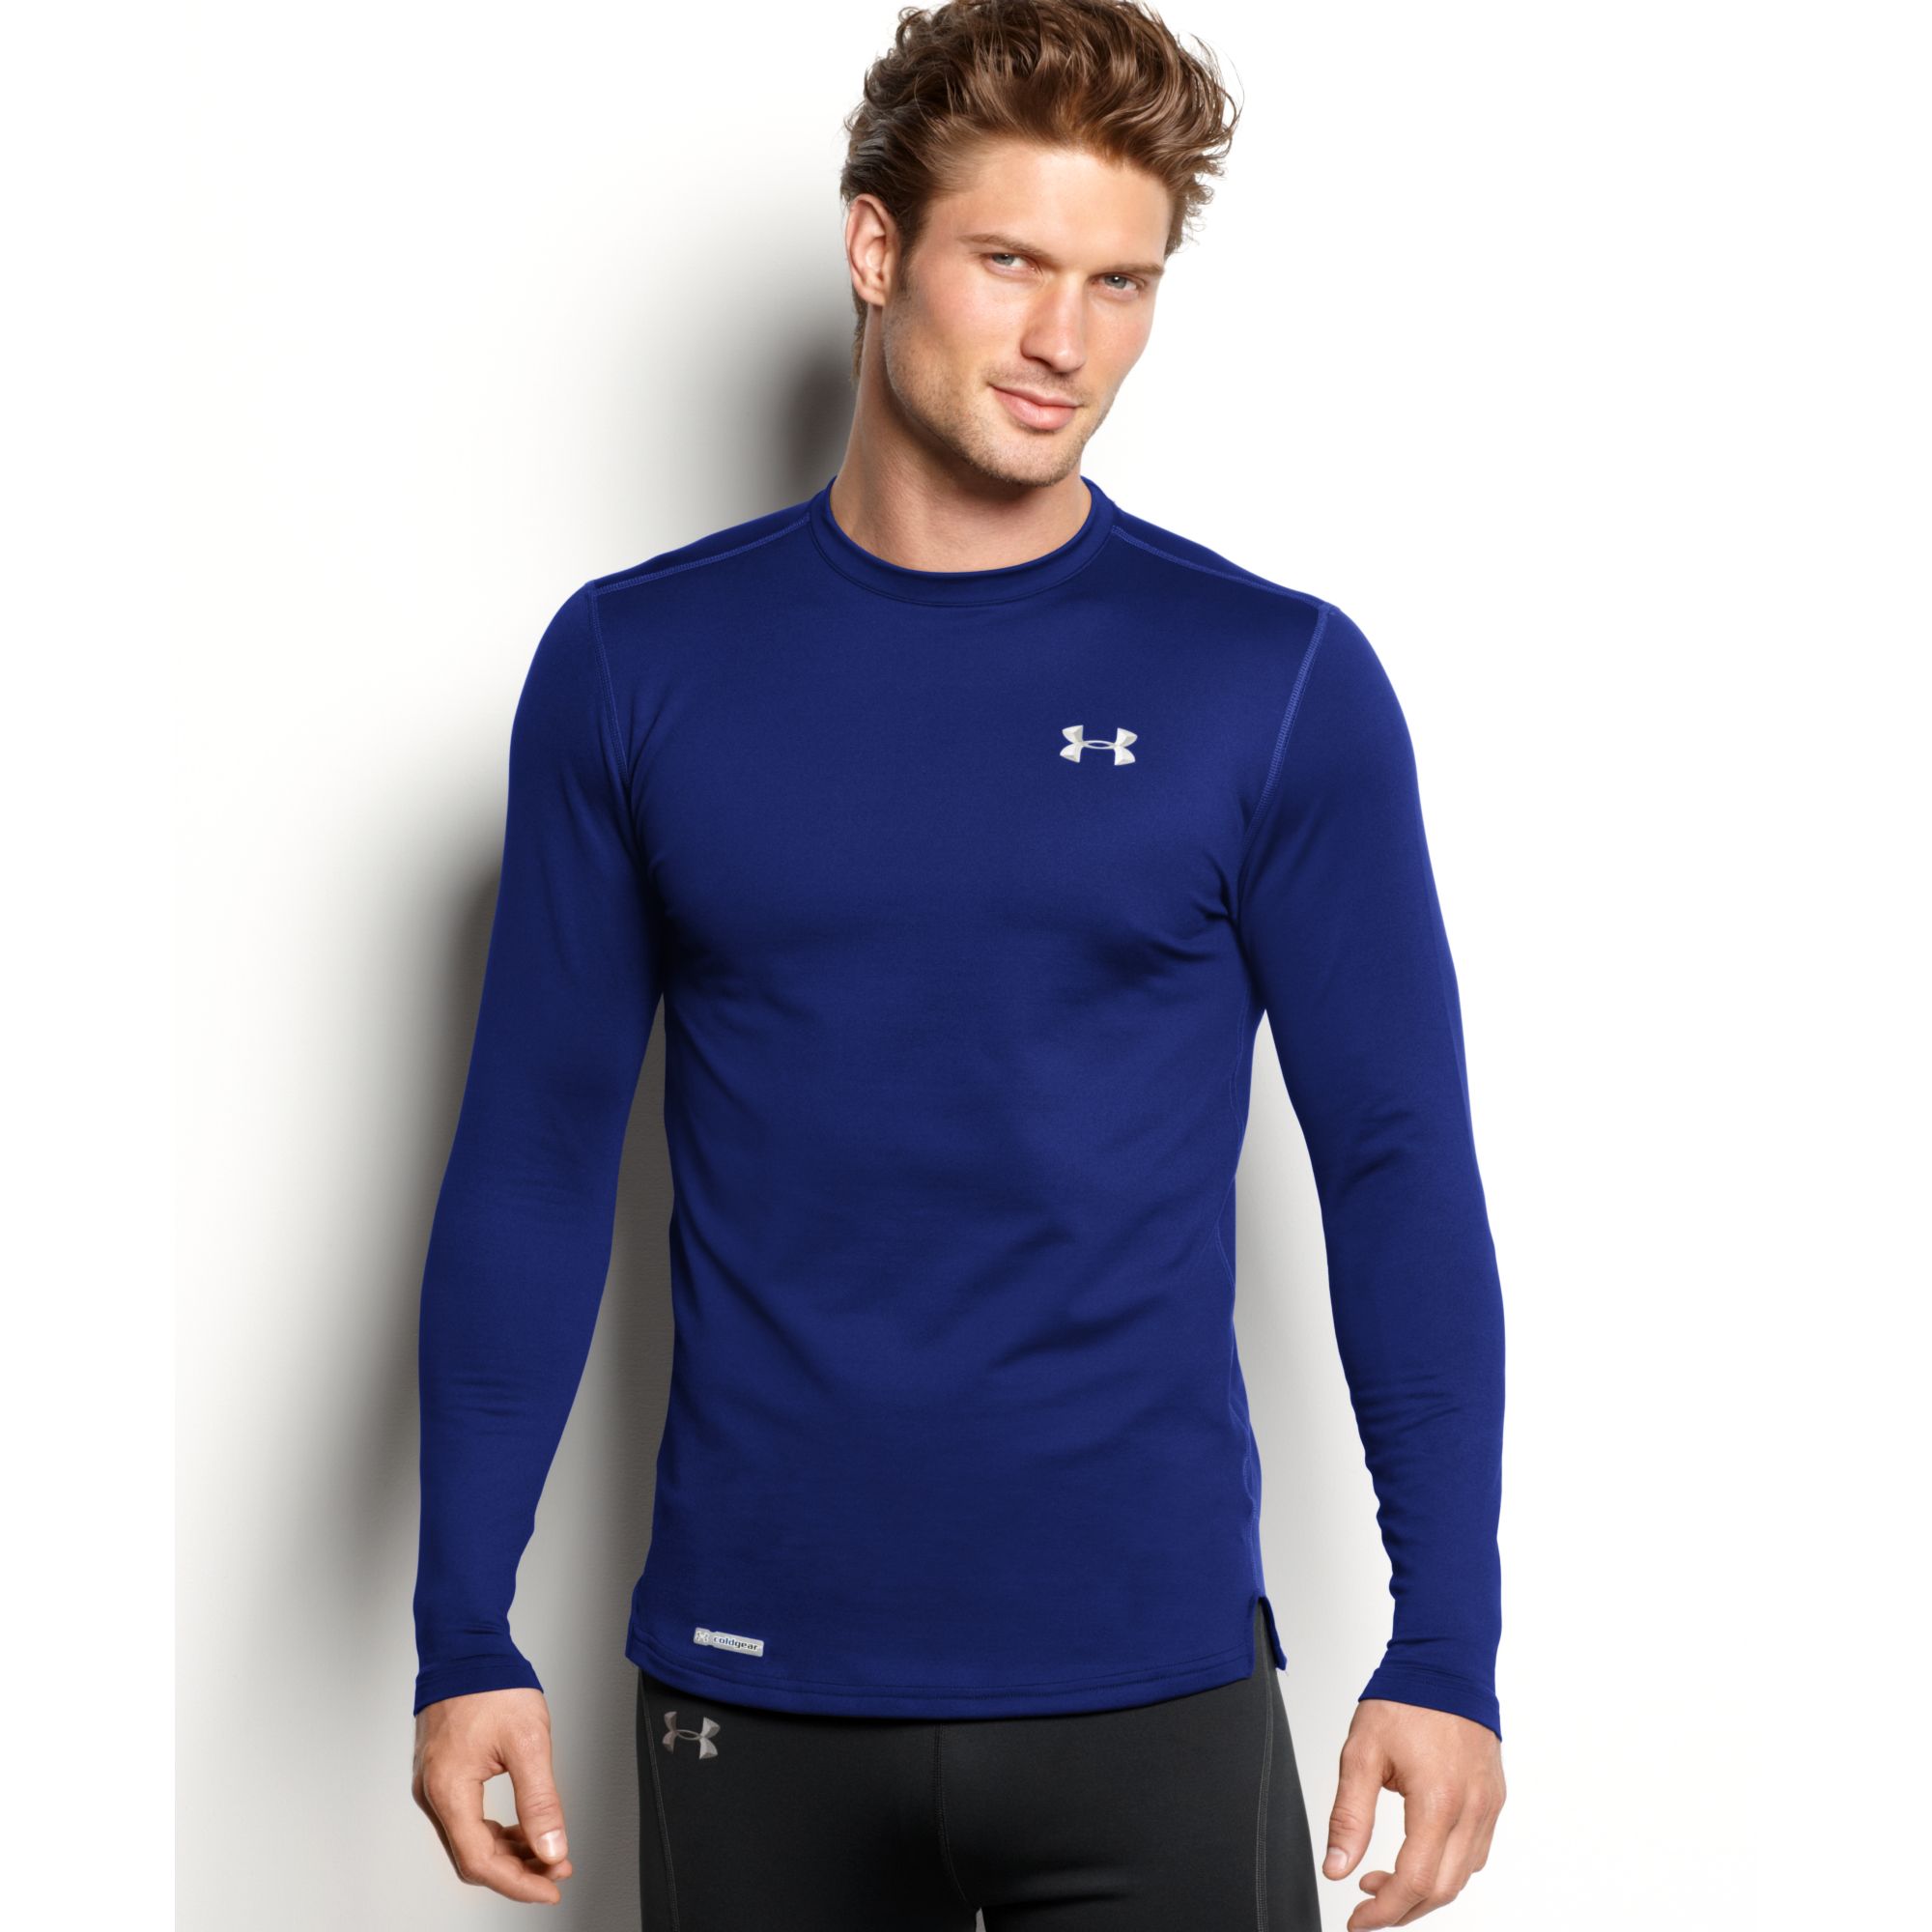 Under Armour Evo Coldgear Fitted Crew Neck in Blue for Men - Lyst